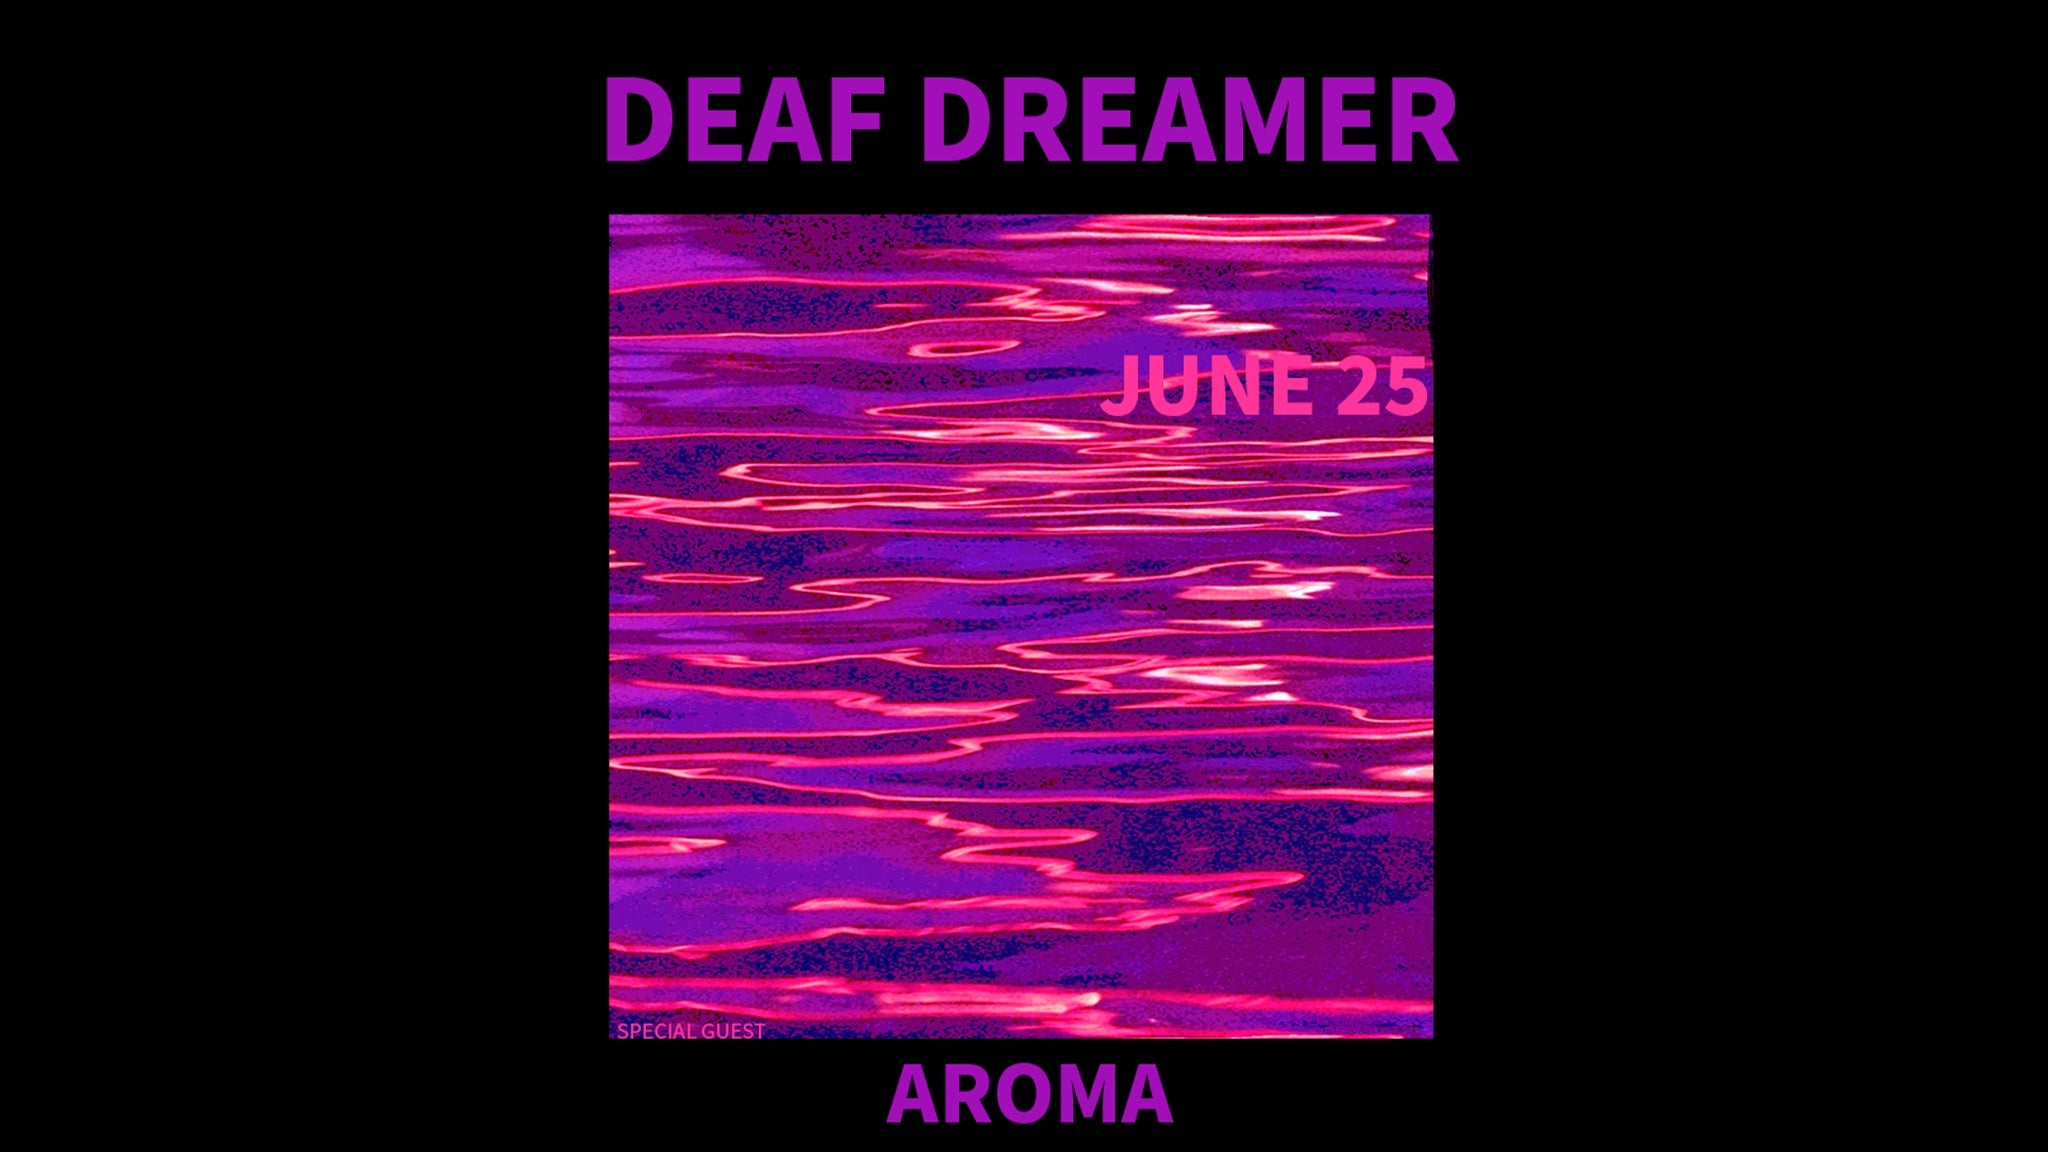 Deaf Dreamer w/ Aroma at The Moroccan Lounge